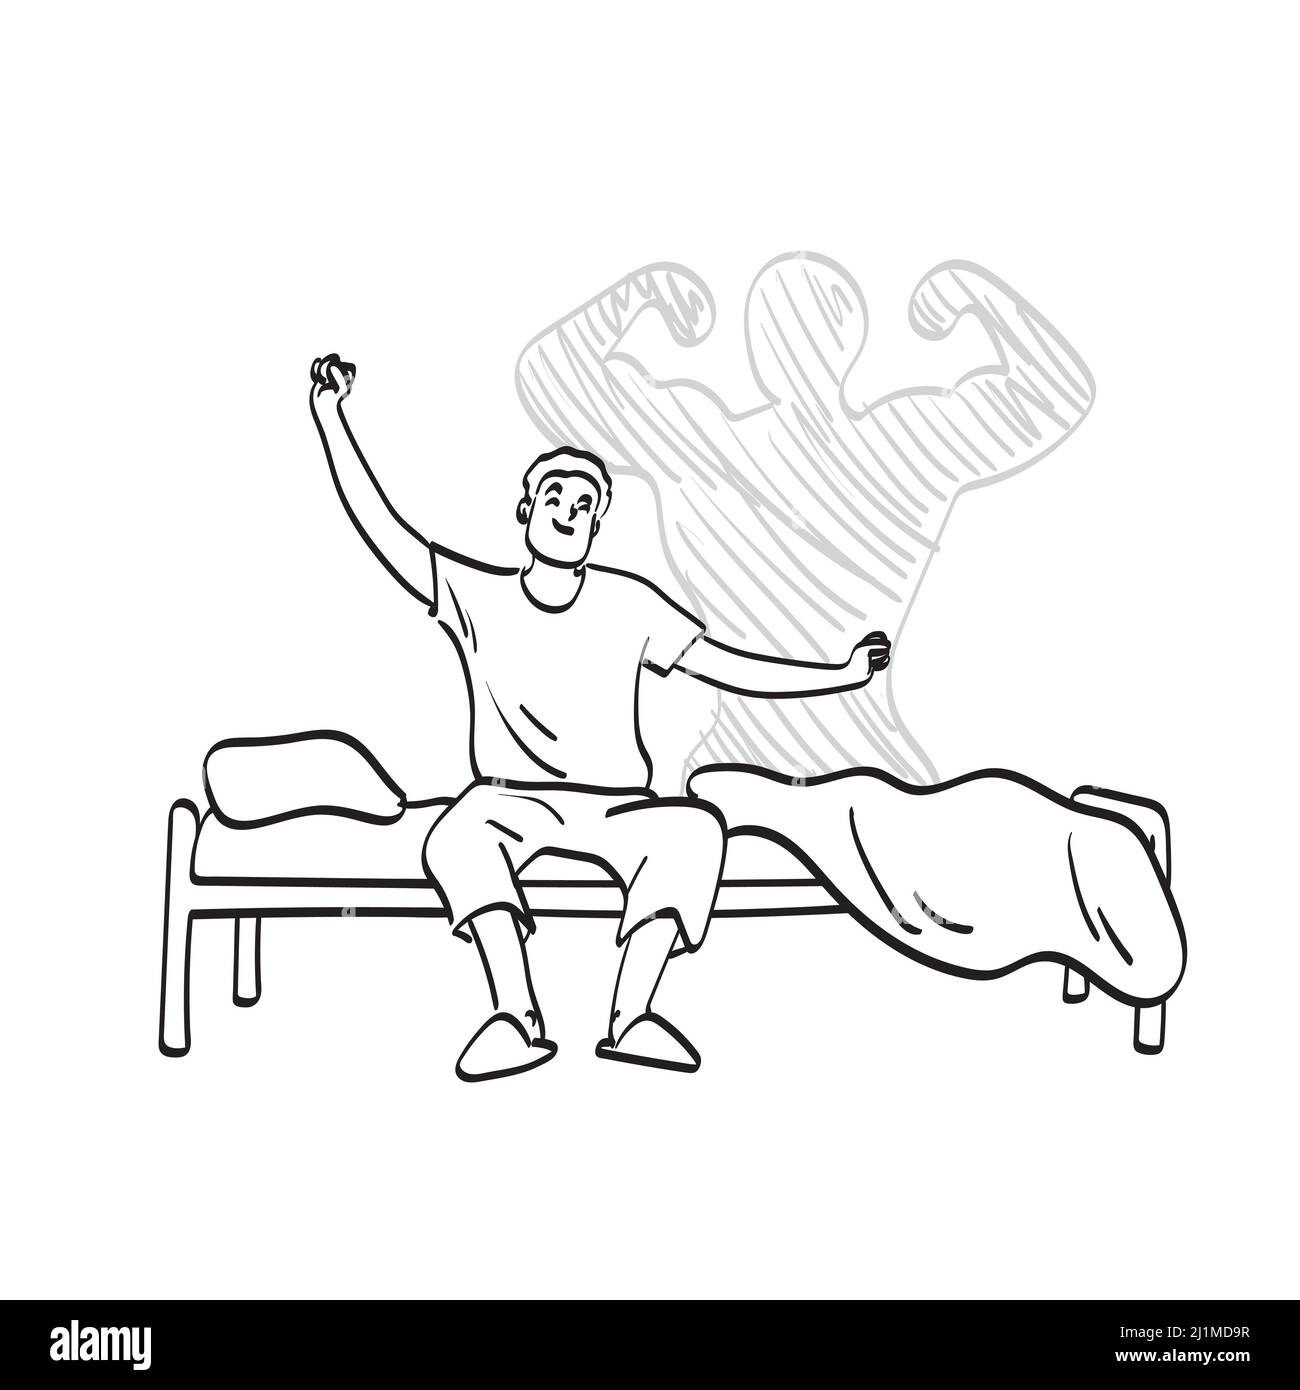 line art man waking up from sleep and stretching seated on his bed with shadow of muscle man behind illustration vector hand drawn isolated on white b Stock Vector